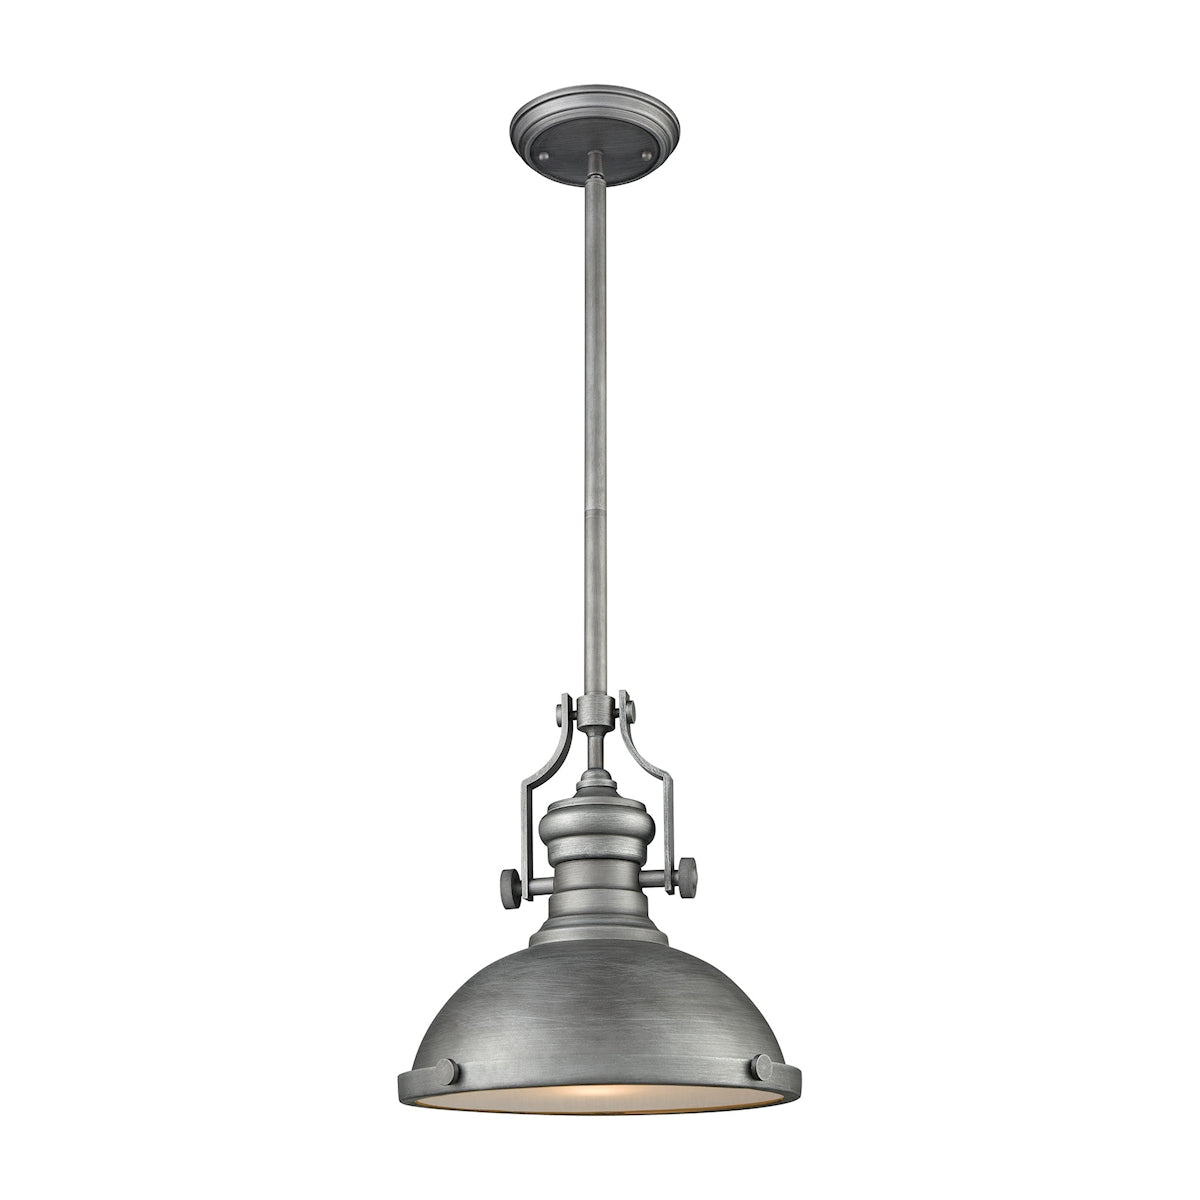 ELK Lighting 66584-1 - Chadwick 13" Wide 1-Light Pendant in Weathered Zinc with Metal and Frosted Glass Diffuser